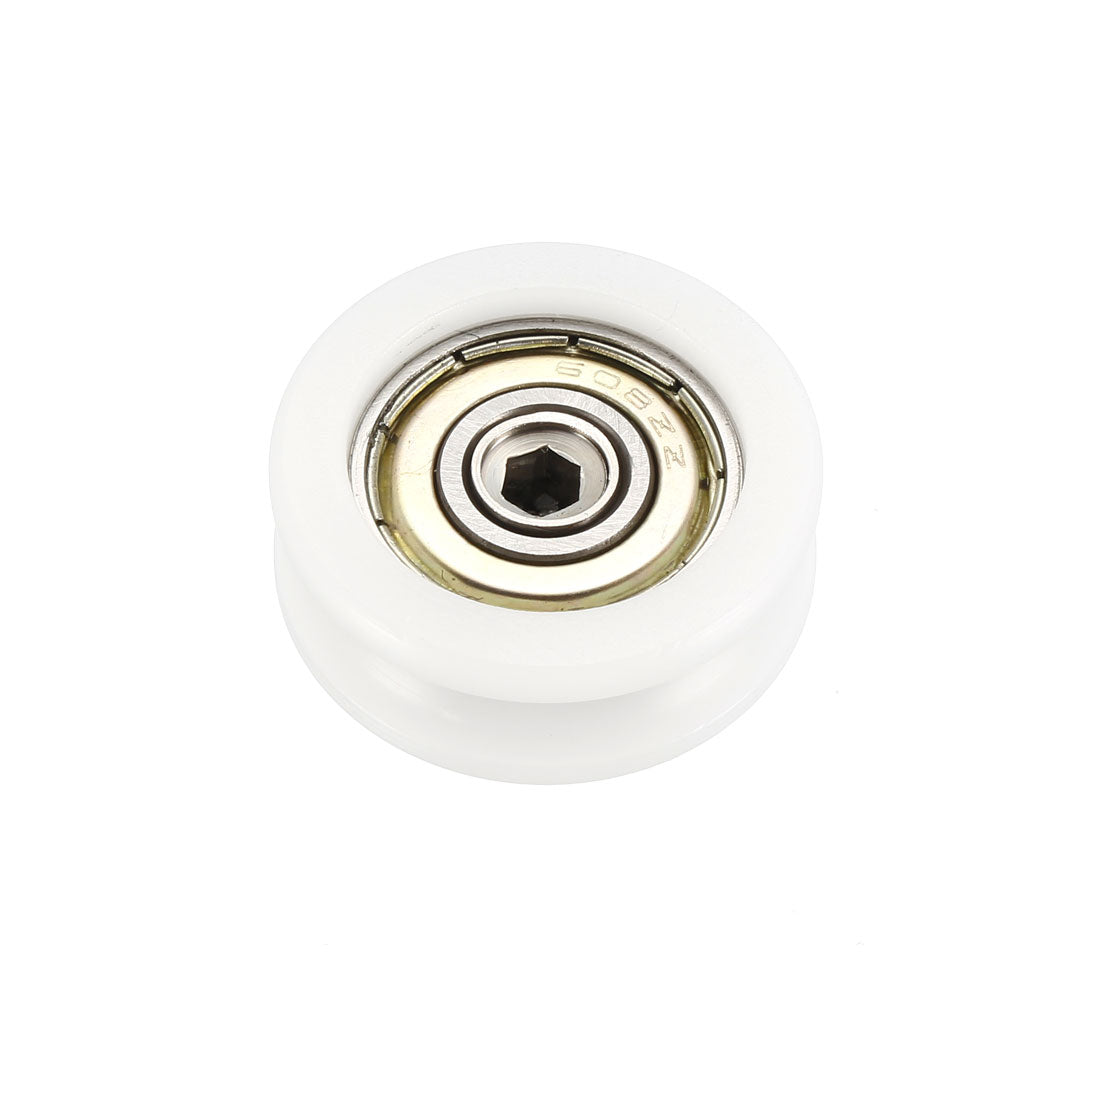 uxcell Uxcell 2.5mm Deep Metal V Groove Threaded Rod Track Guide Bearing Pulley Wheel White 30x11mm 1pcs